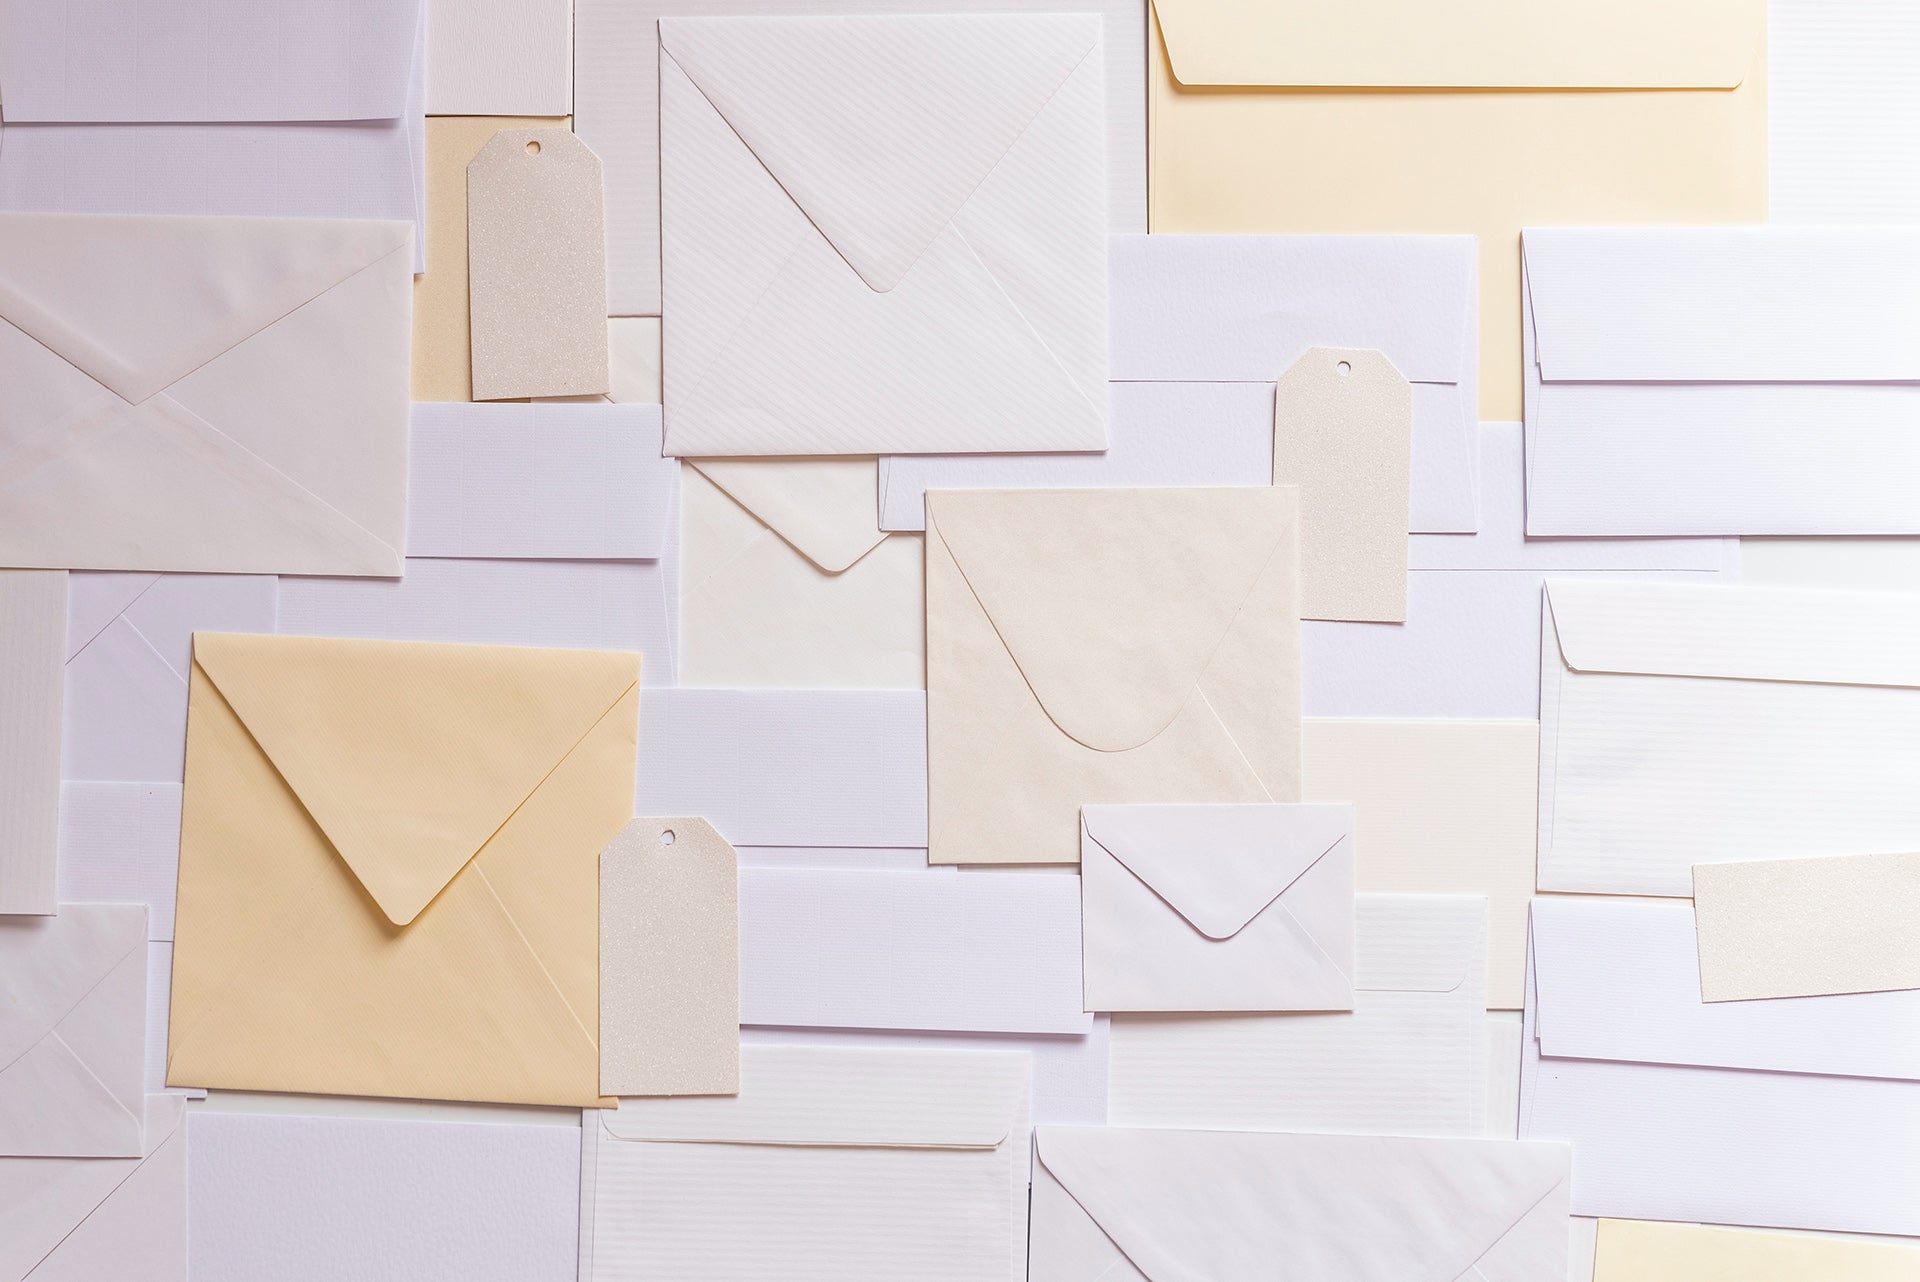 Different types of envelopes laid out flat on a table